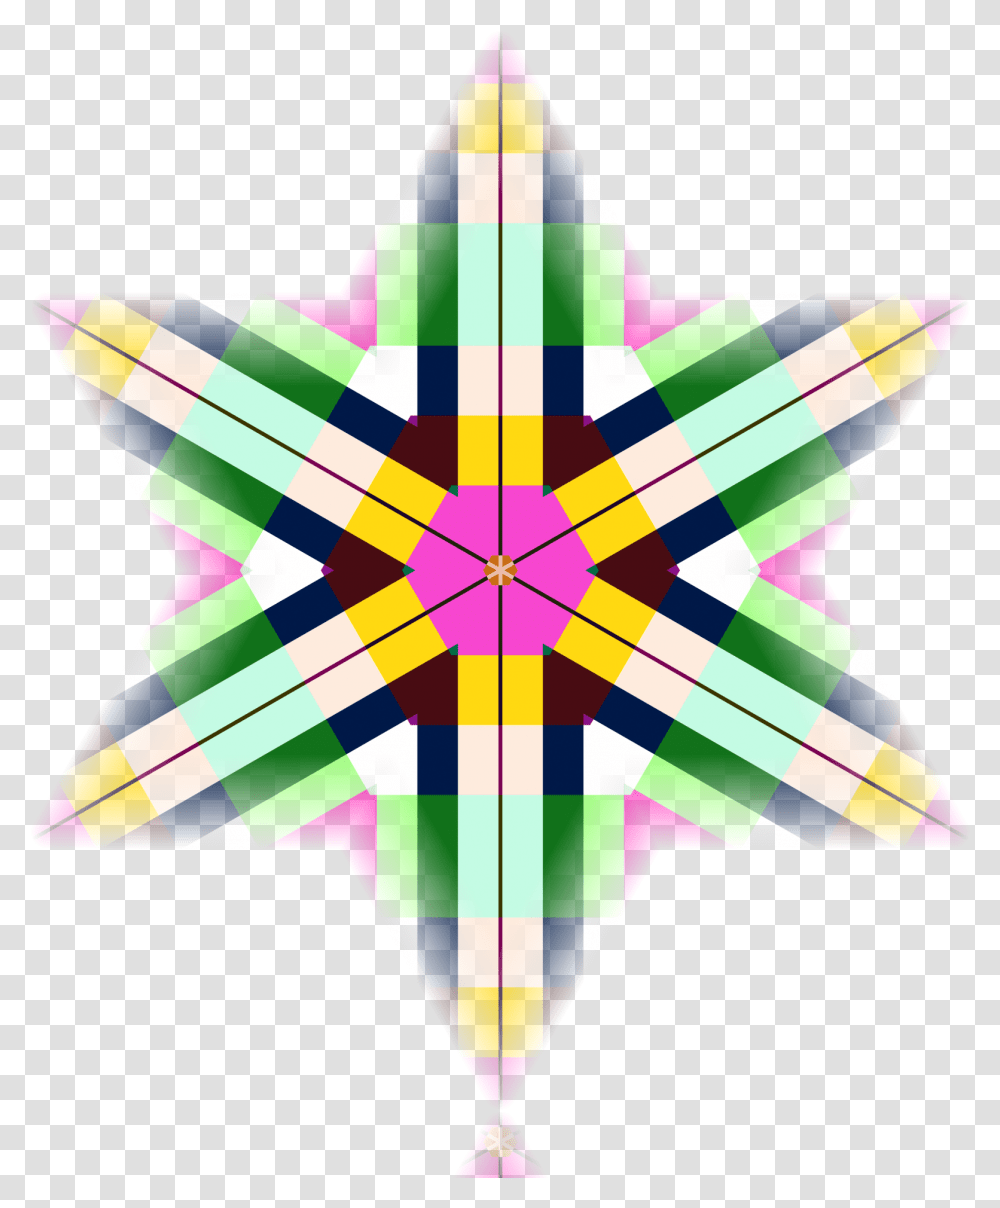 Star Kaleidoscope Free Stock Photo Introvert And Extrovert Space In Architecture, Symbol, Star Symbol, Pattern, Ornament Transparent Png